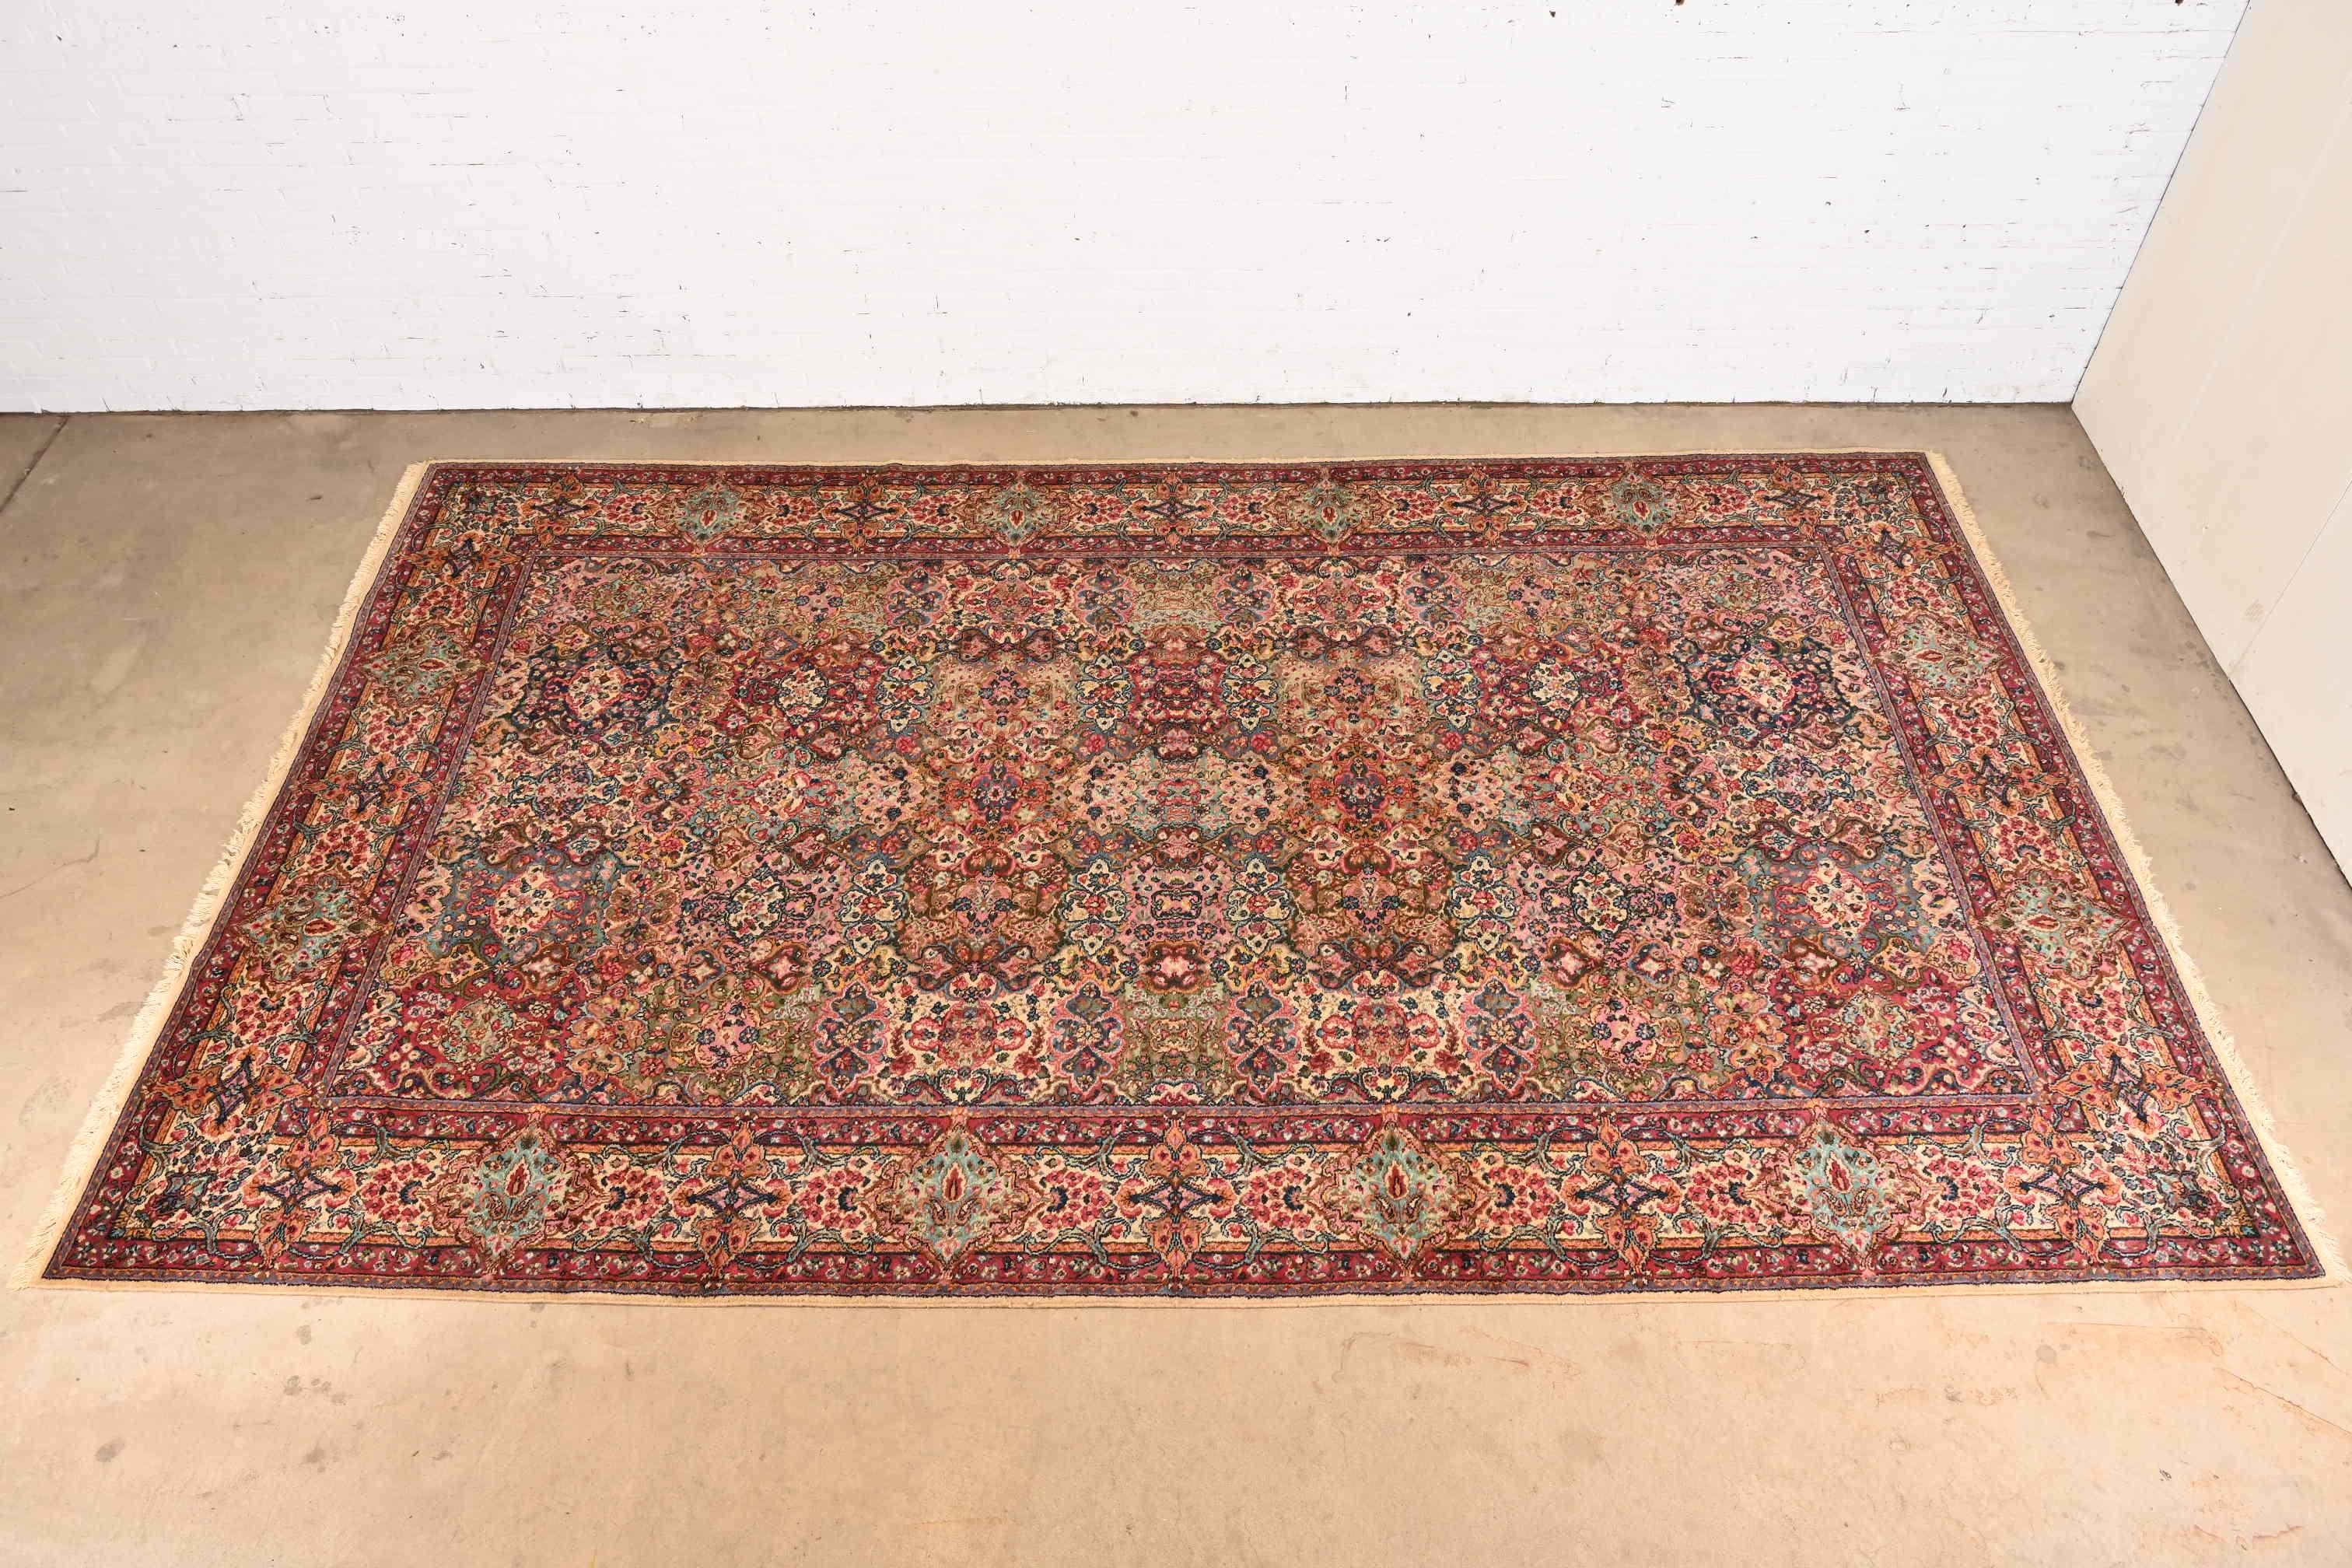 An exceptional Persian Kirman style room size wool rug

By Karastan

USA, Circa 1940s

Features a beautiful all-over patchwork pattern containing myriad flowers woven in myriad colors across the field, and surrounded by a border of similar pattern